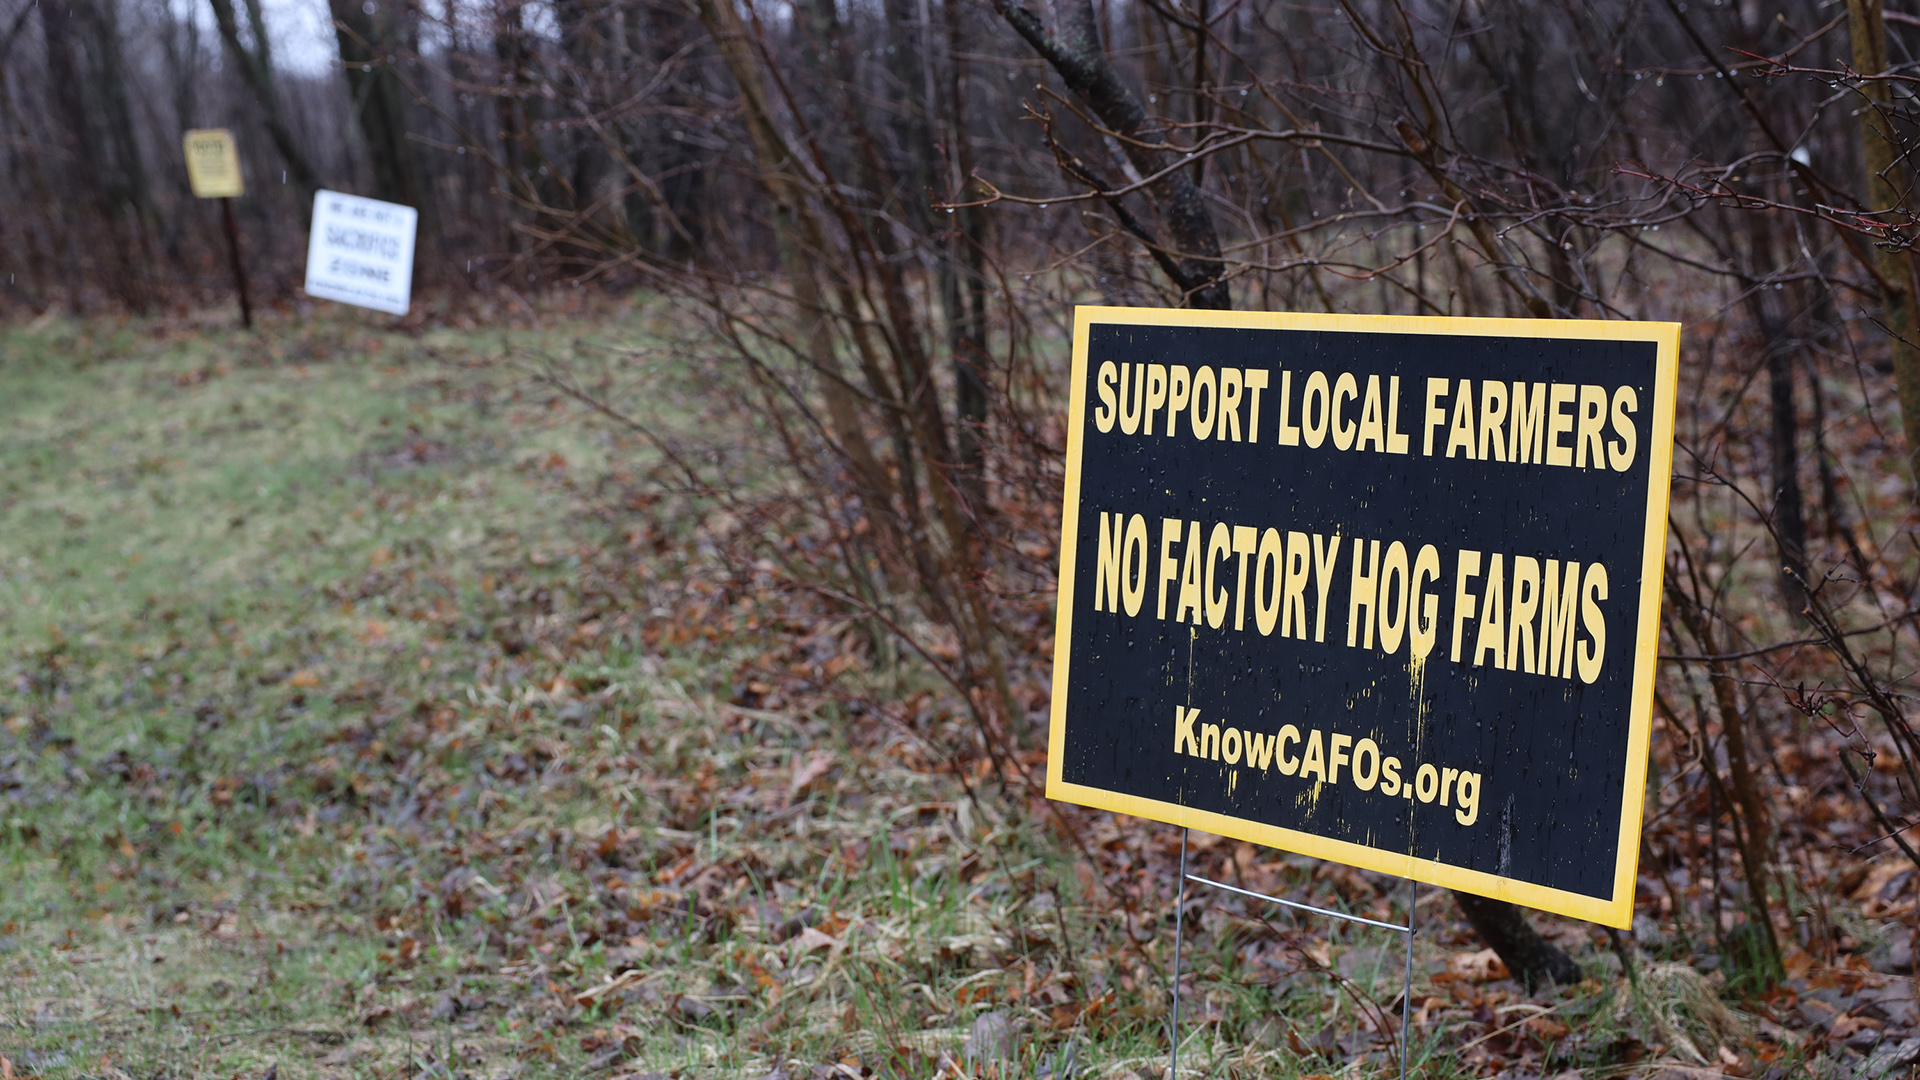 A printed sign with the words "Support Local Farms" and "No Factory Hog Farm" is mounted on yard sign stakes on a lawn, with leafless bushes and trees in the background.